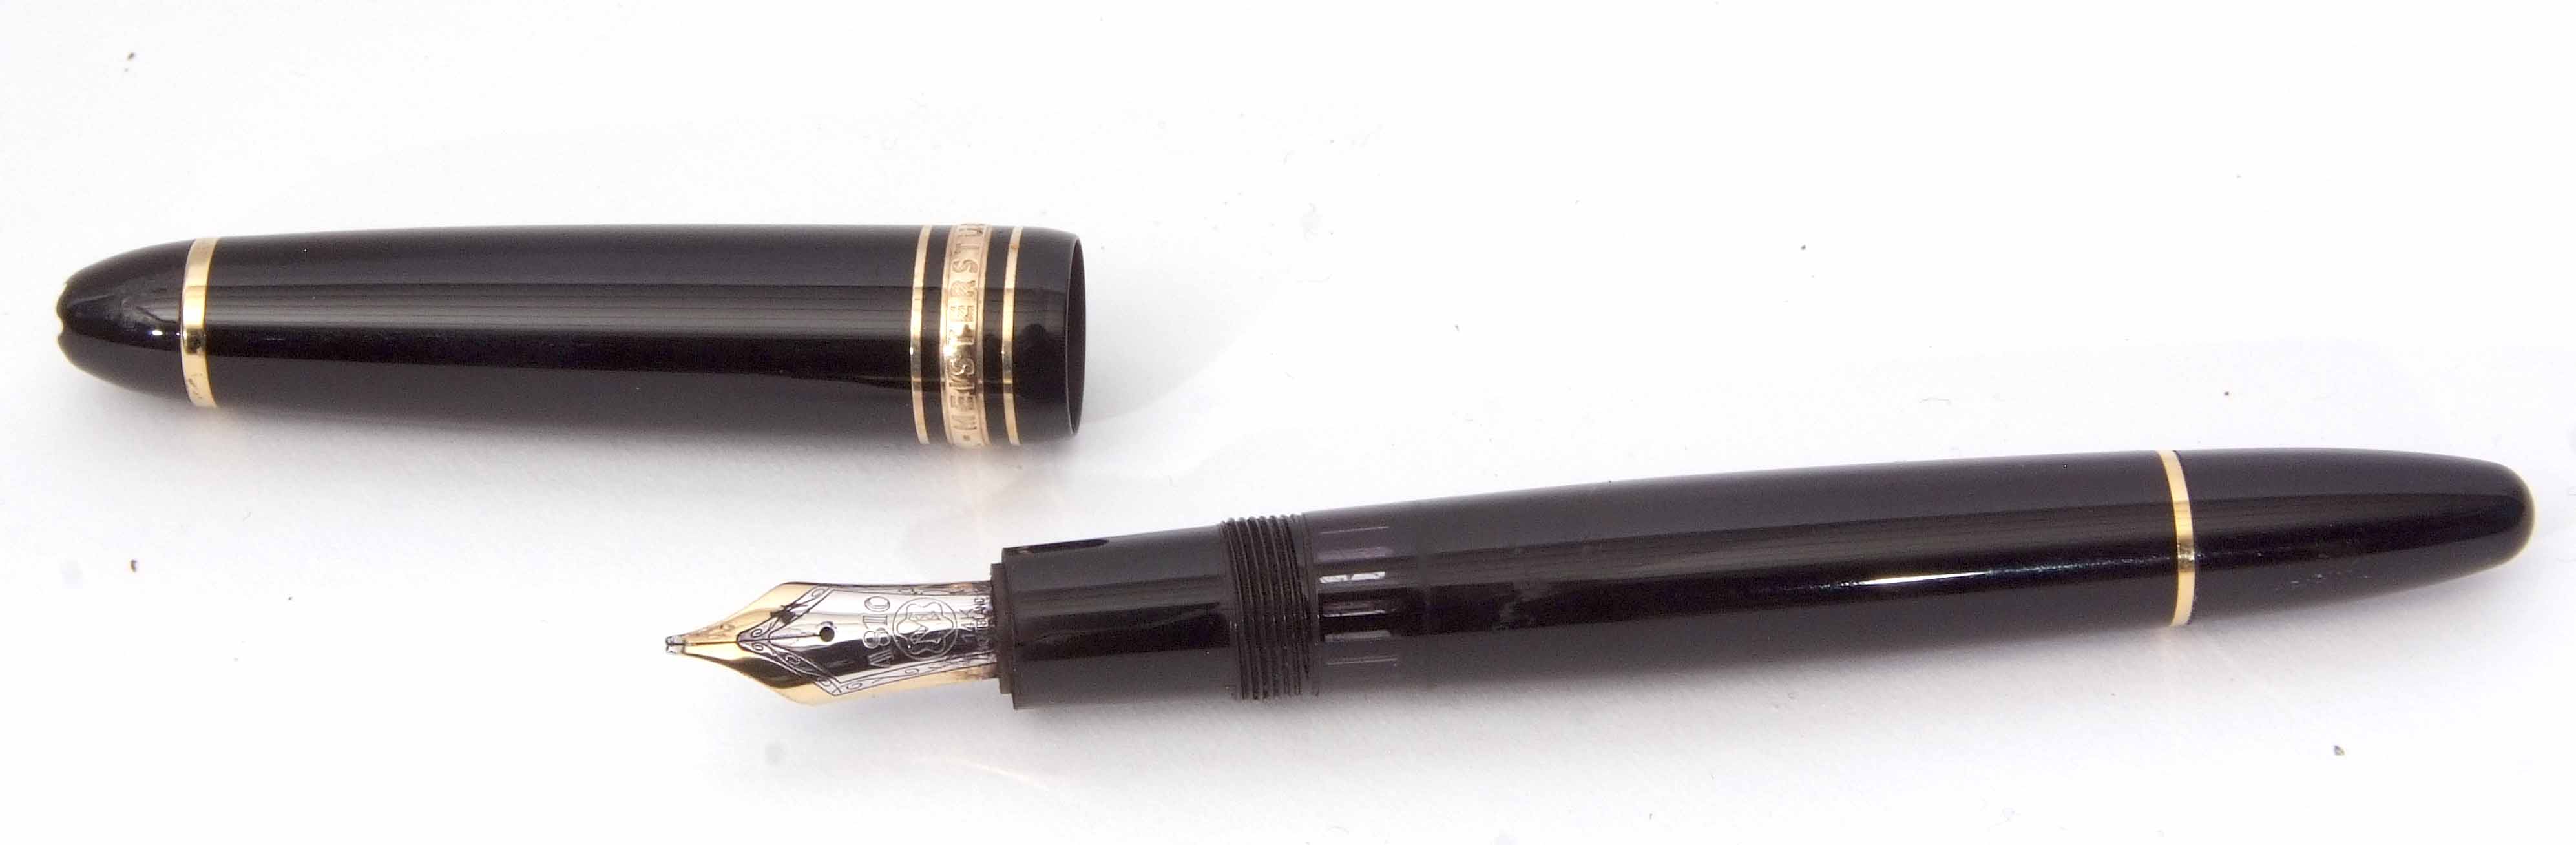 Late 20th century cased fountain pen, Mont Blanc, 4810, of typical cylindrical form with screw - Image 3 of 3